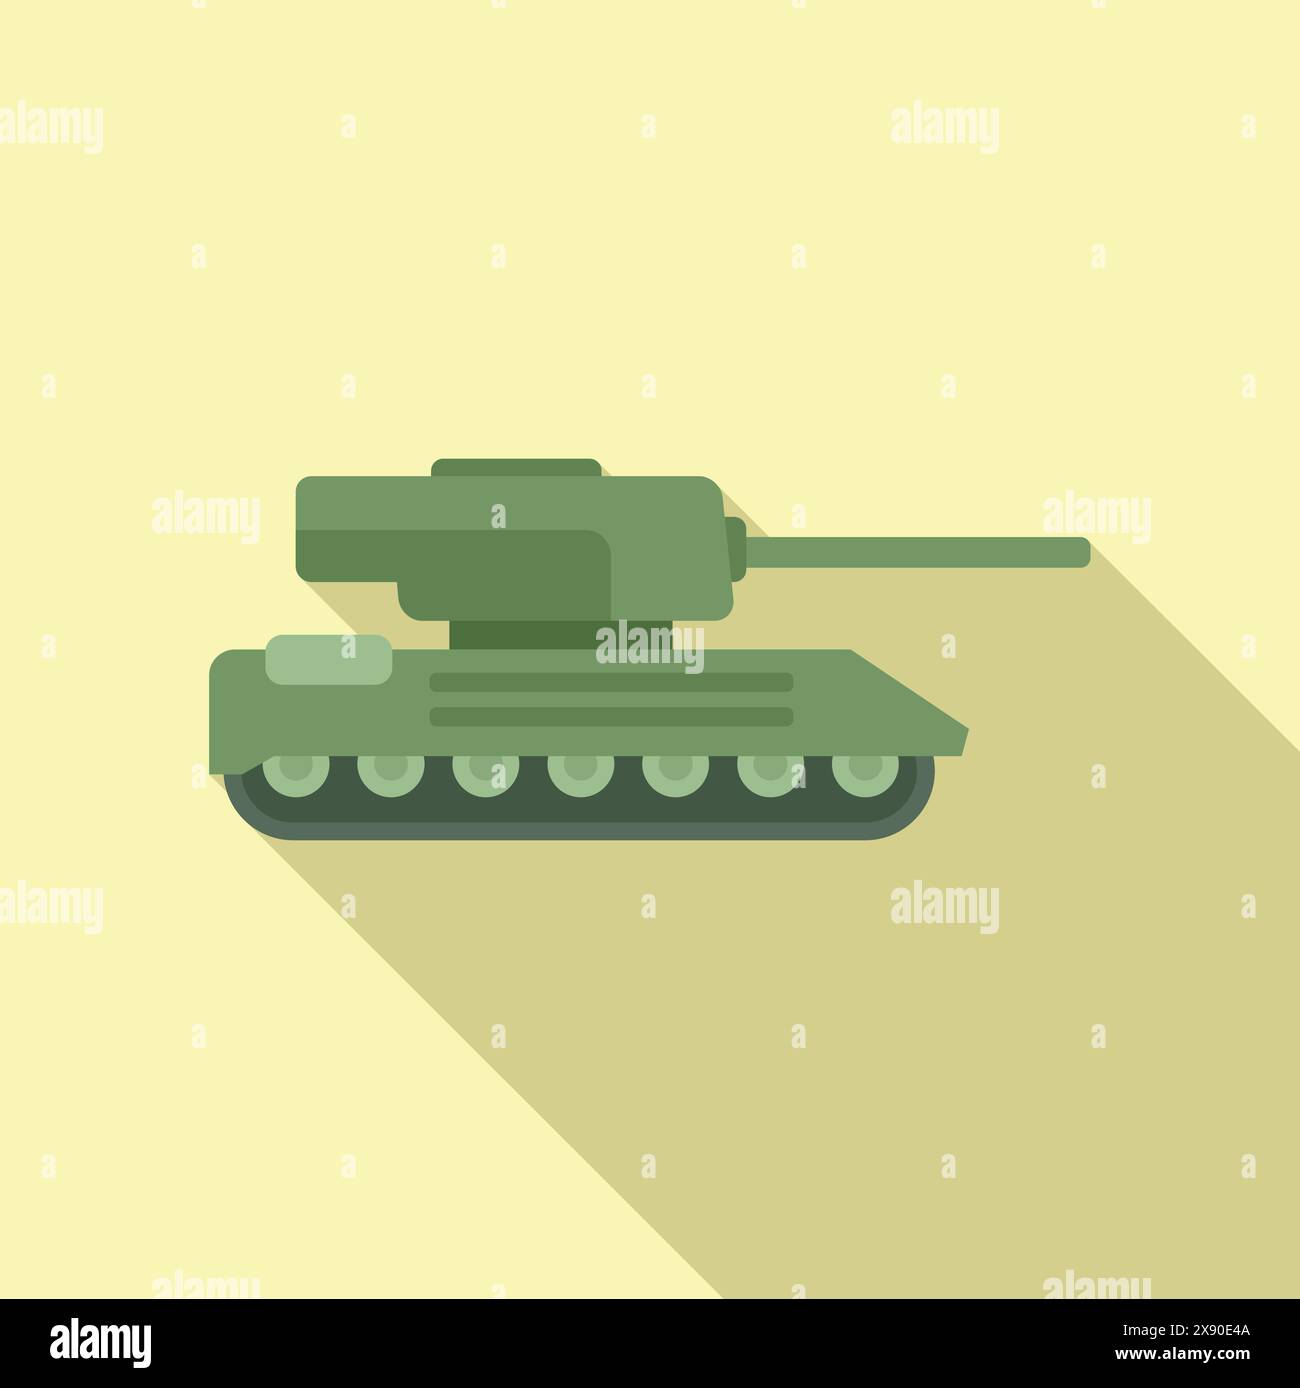 Simplistic graphic of a green military tank, depicted in a modern flat design style Stock Vector